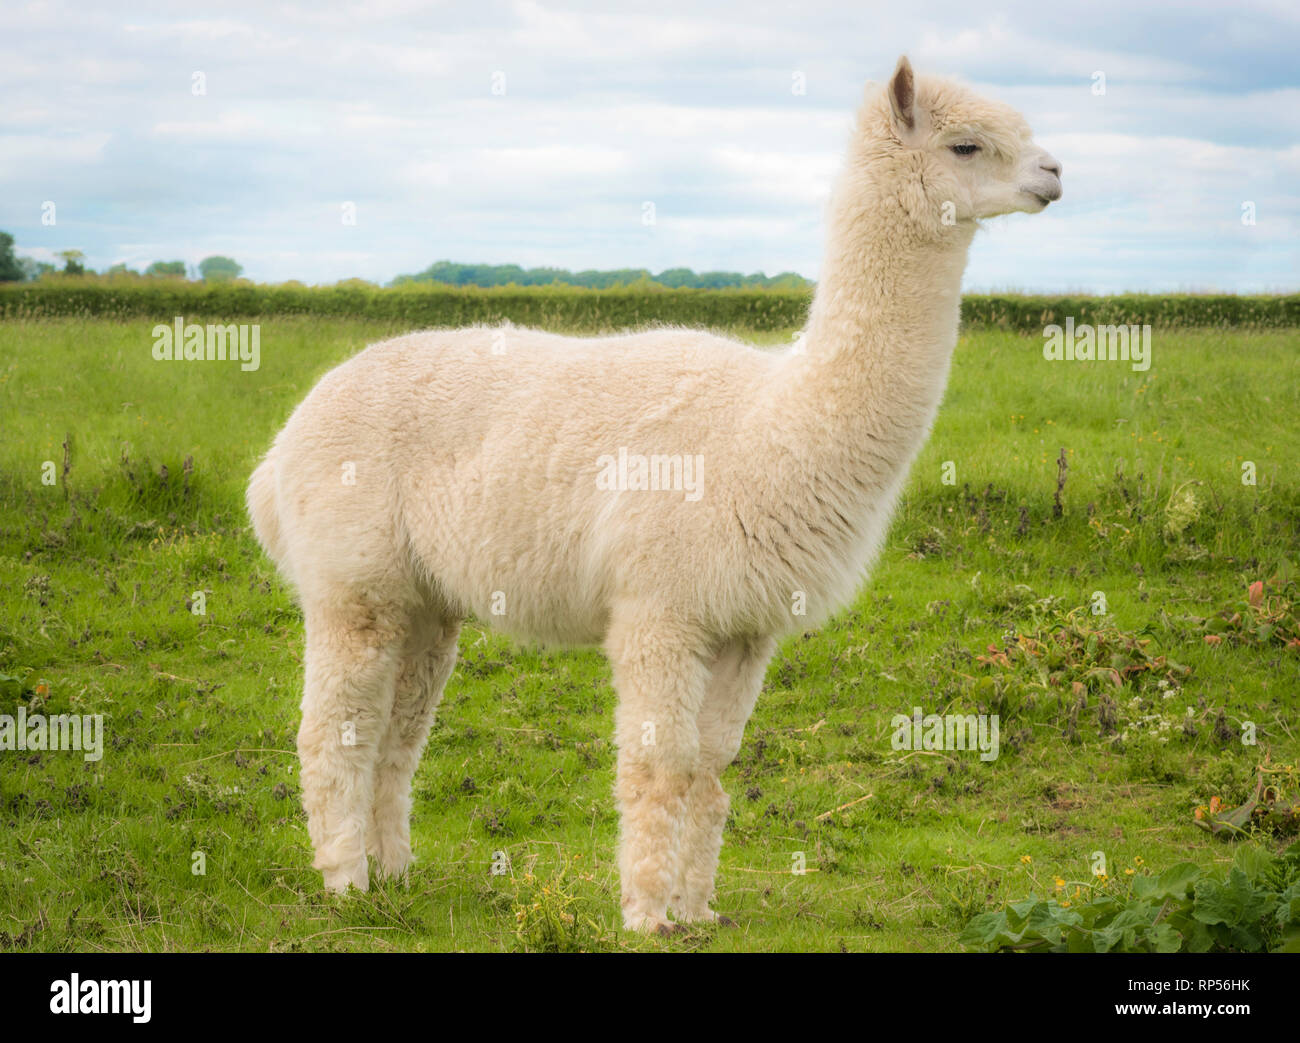 Alpaca (Vicugna pacos) - a species of South American camelid. Stock Photo